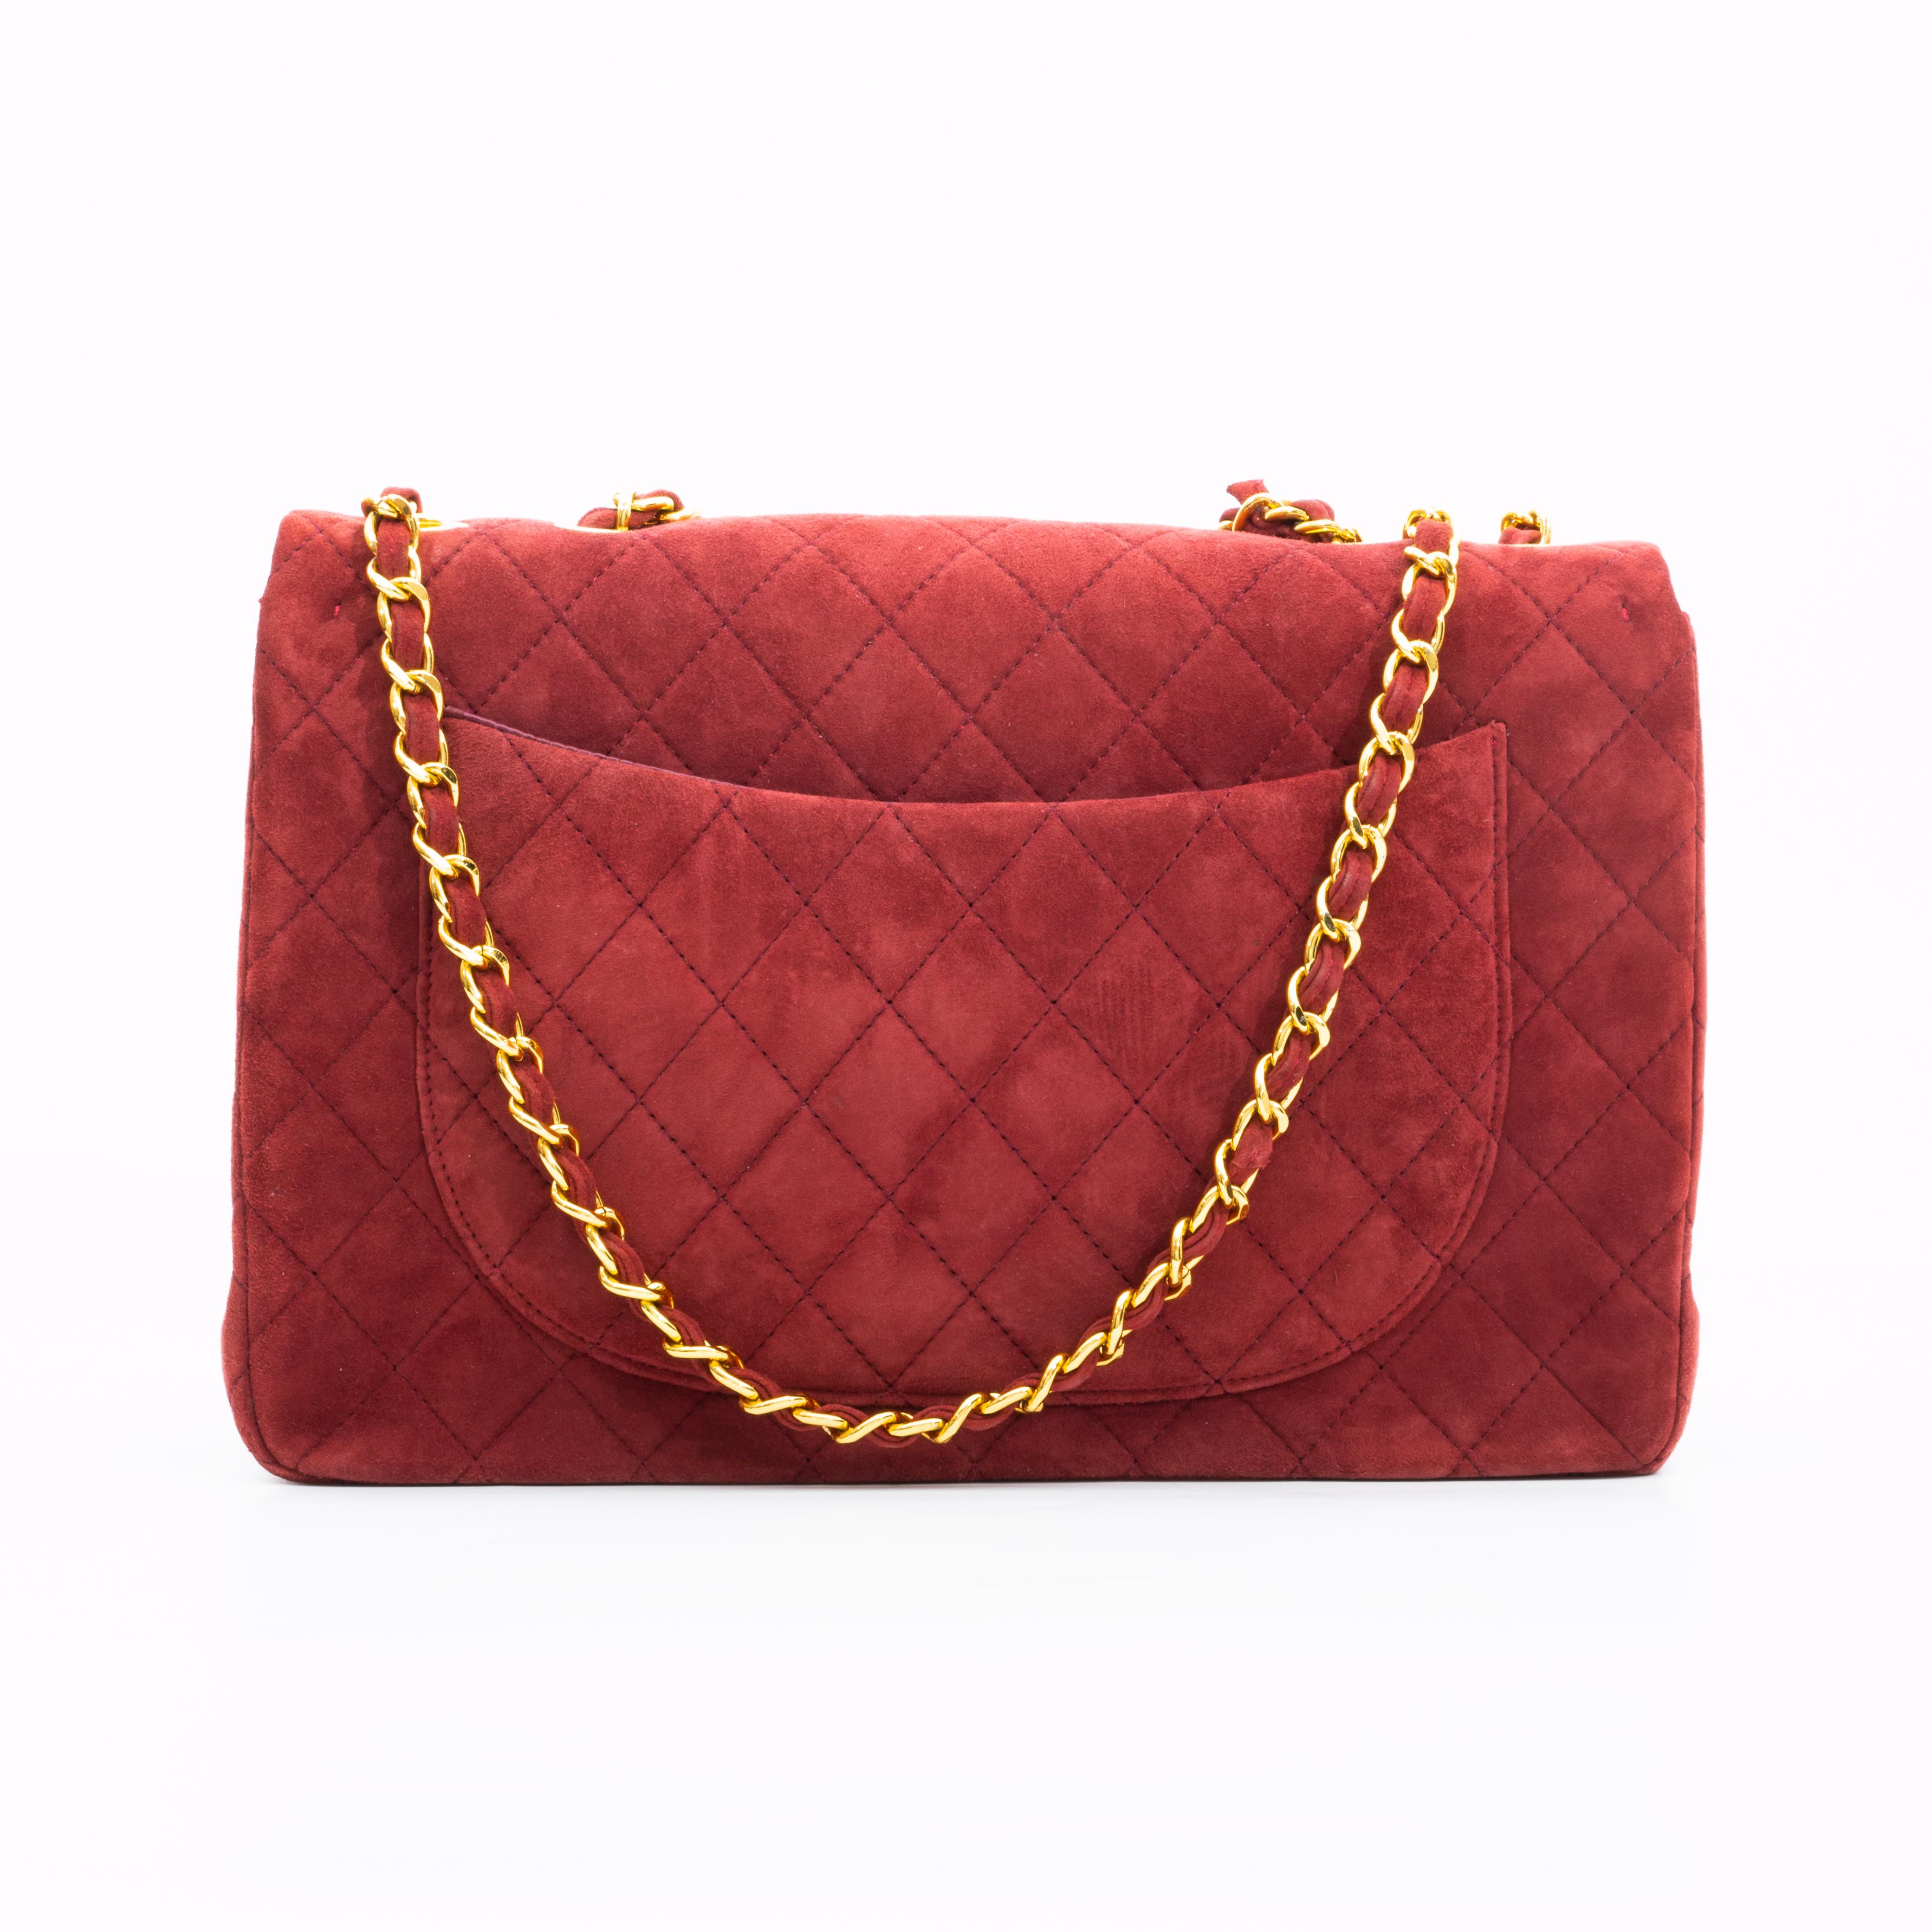 This bag is made with diamond quilted suede in burgundy with gold tone hardware. The bag features a chain interlaced with leather shoulder strap, a main fold-over top, CC turn lock closure, back slip pocket, and an interior with leather lining in